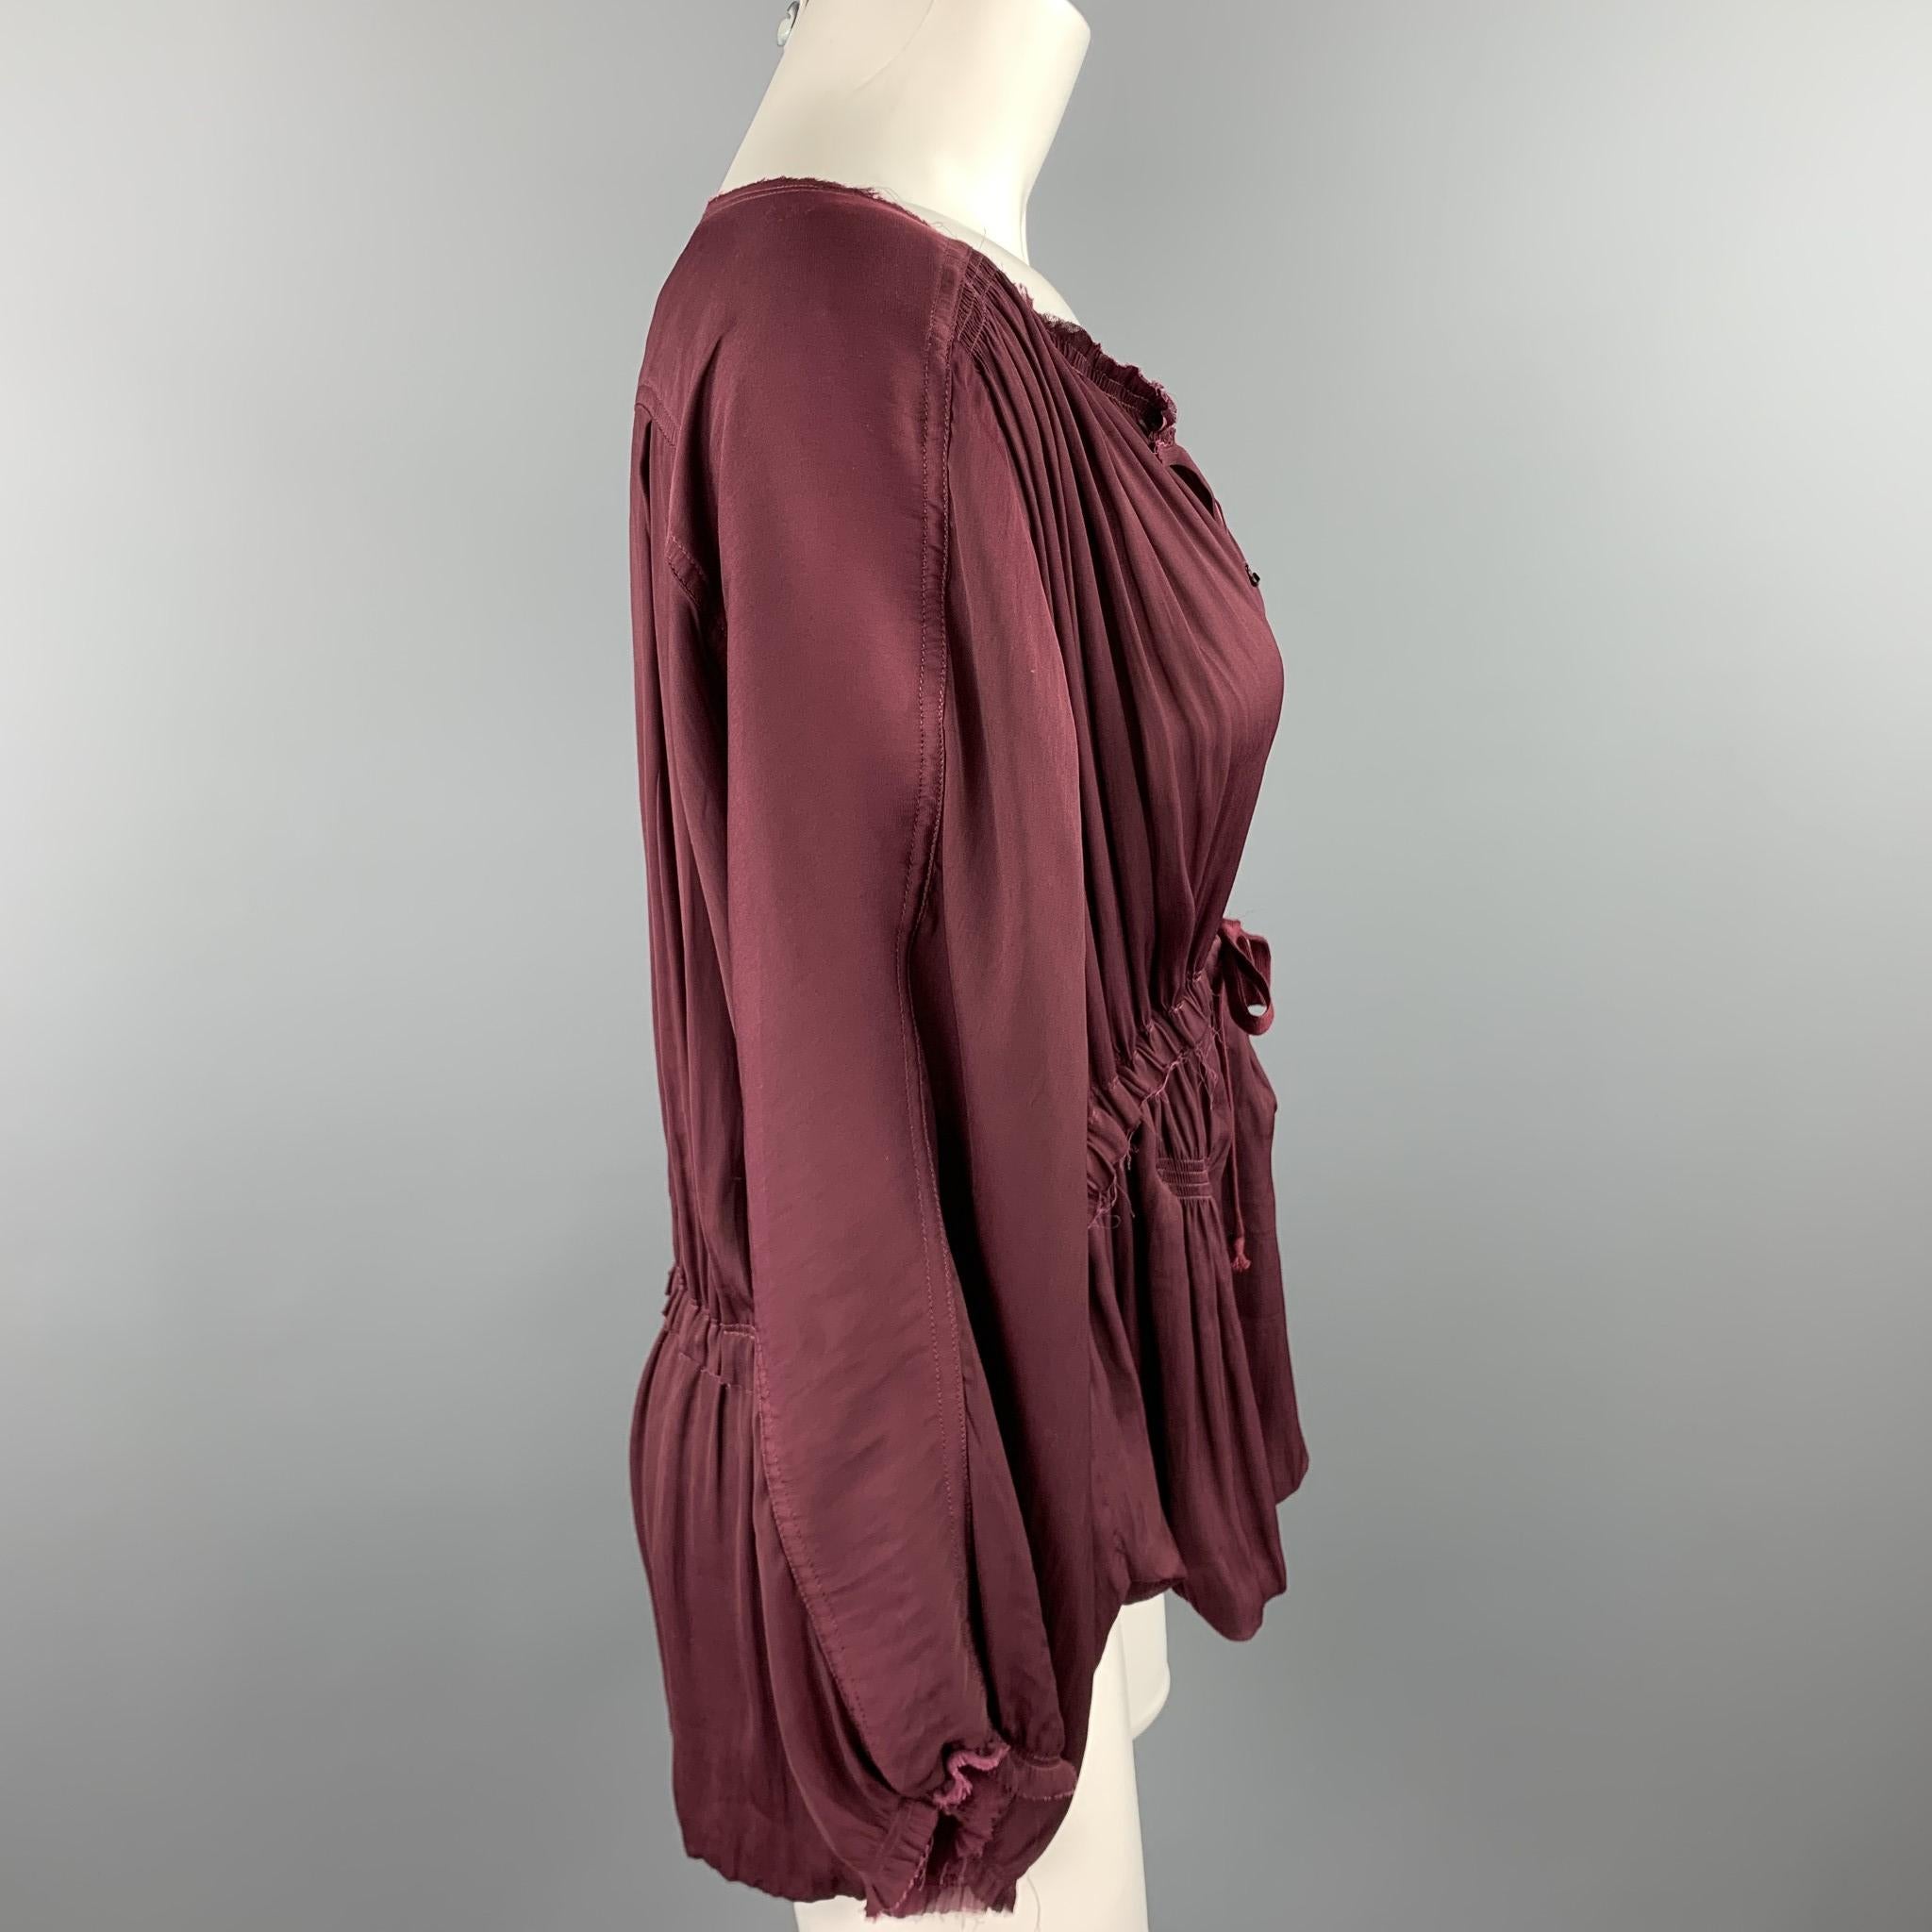 ISABEL MARANT blouse comes in a burgundy polyester featuring a boho style, raw hem, hook & eye detail, and a drawstring closure.

Good Pre-Owned Condition.
Marked: 2

Measurements:

Shoulder: 16 in. 
Bust: 42 in. 
Sleeve: 17.5 in. 
Length: 26 in.